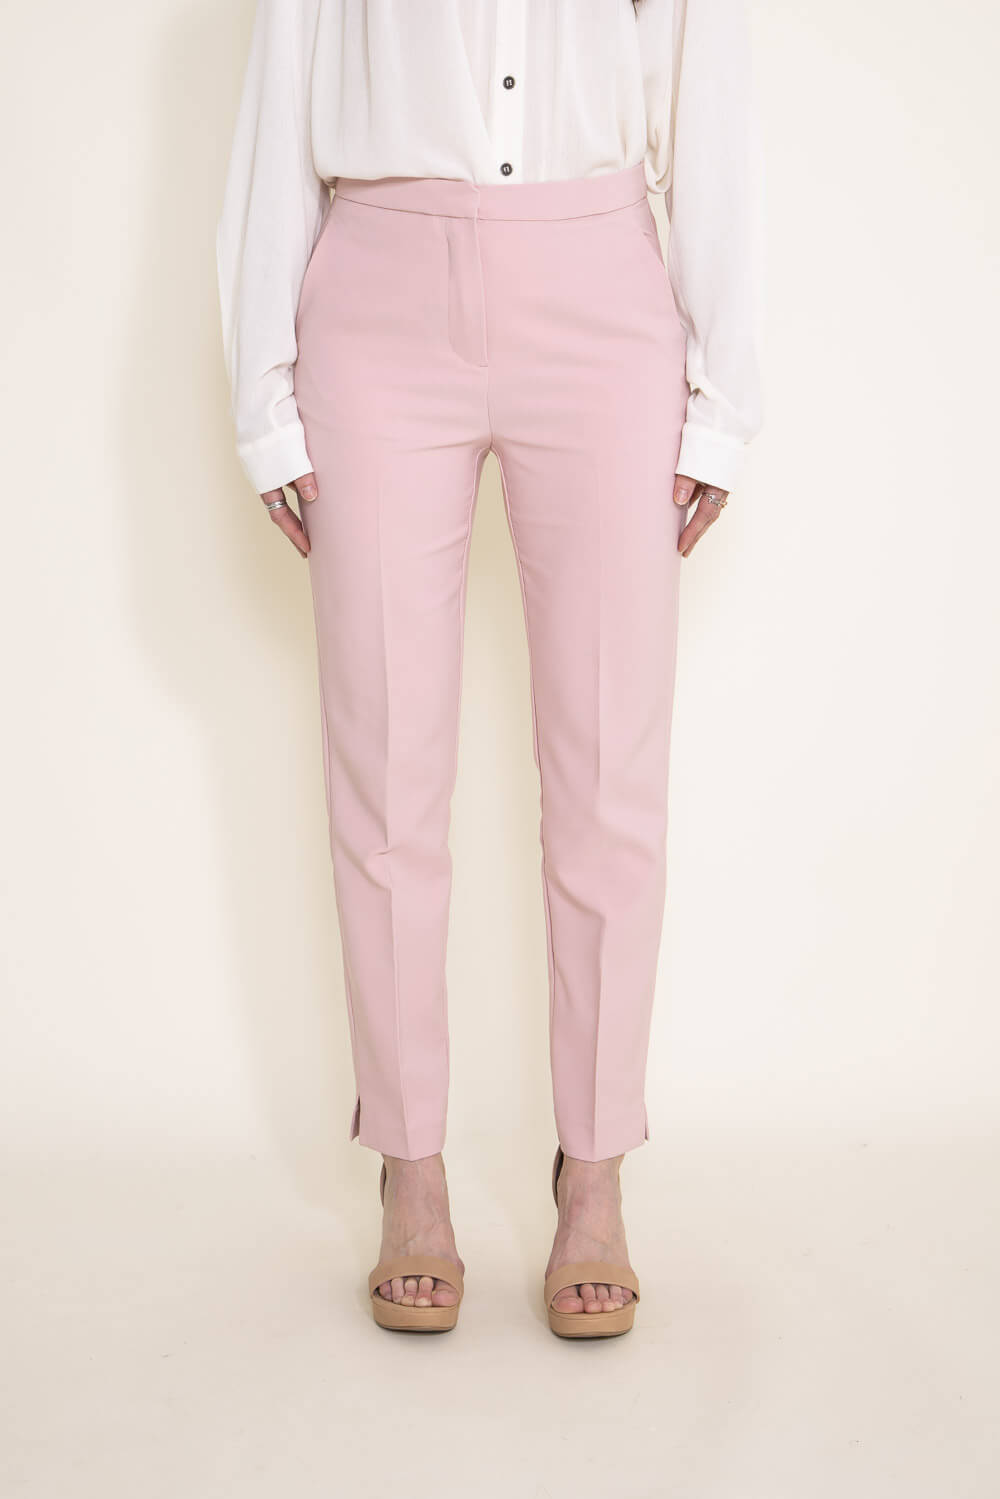  Pink - Women's Wear To Work Pants / Women's Pants: Clothing,  Shoes & Accessories